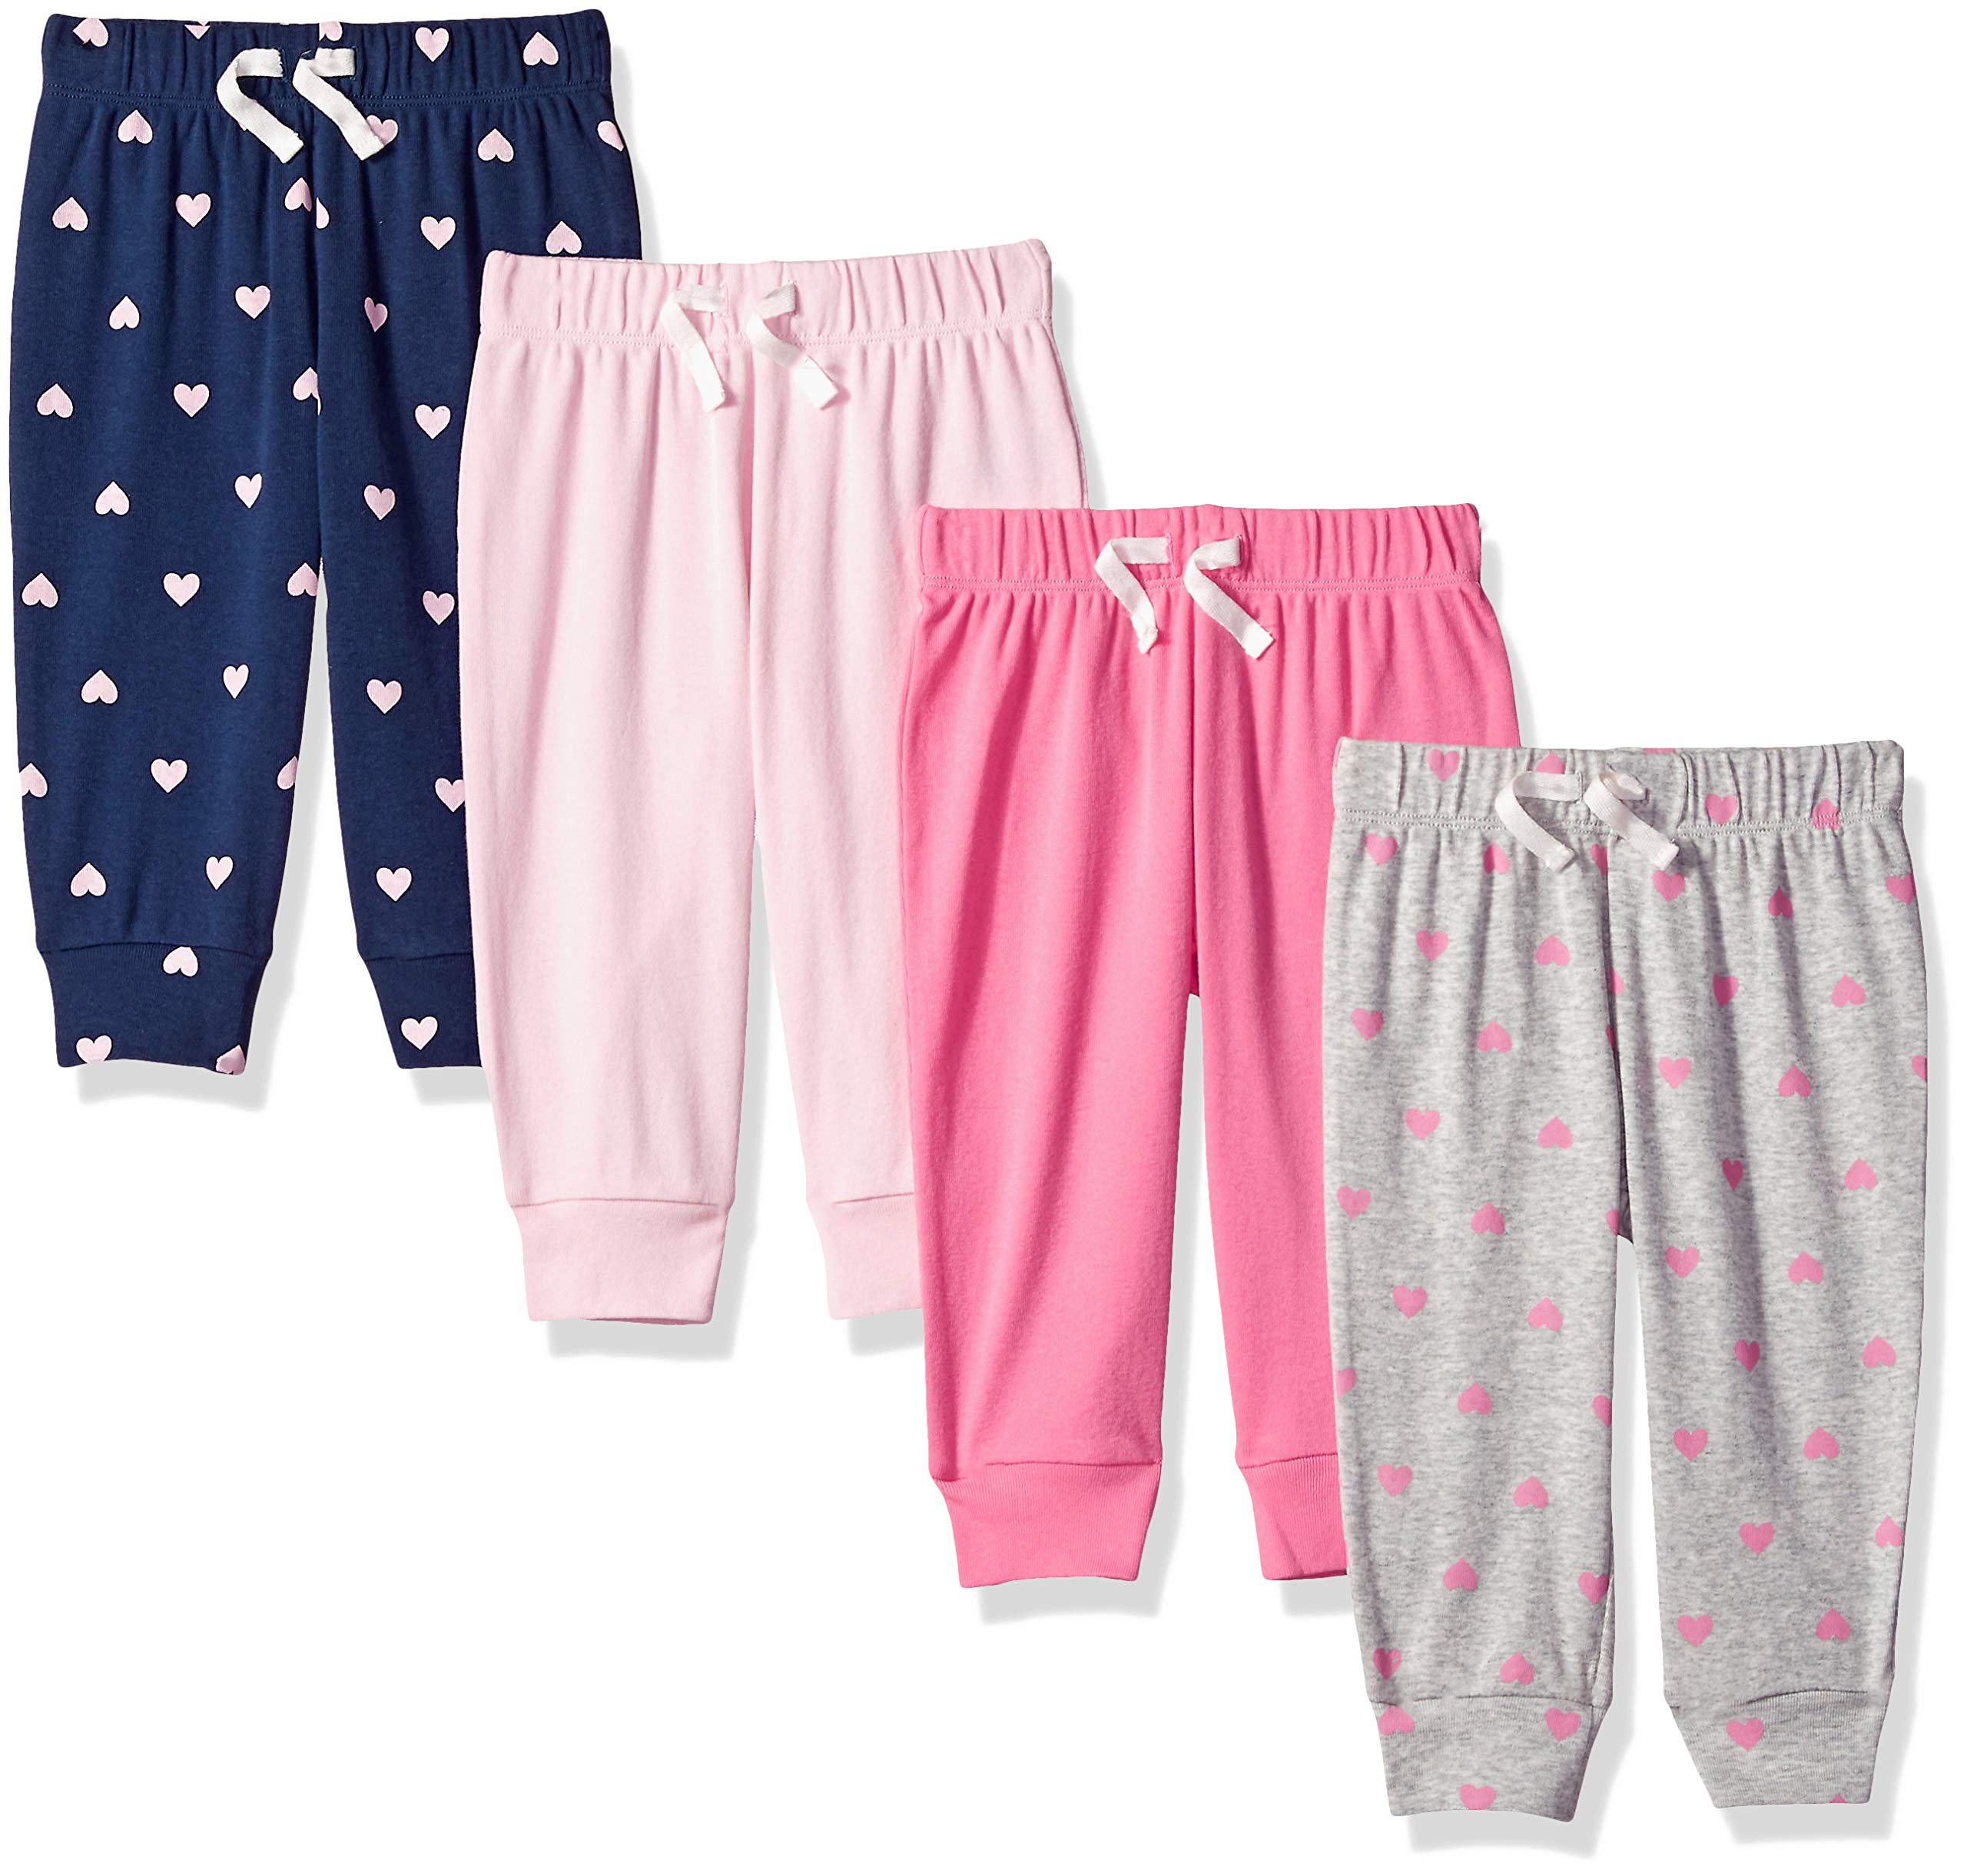 Amazon Essentials Baby Girls' Cotton Pull-On Pants, Pack of 4